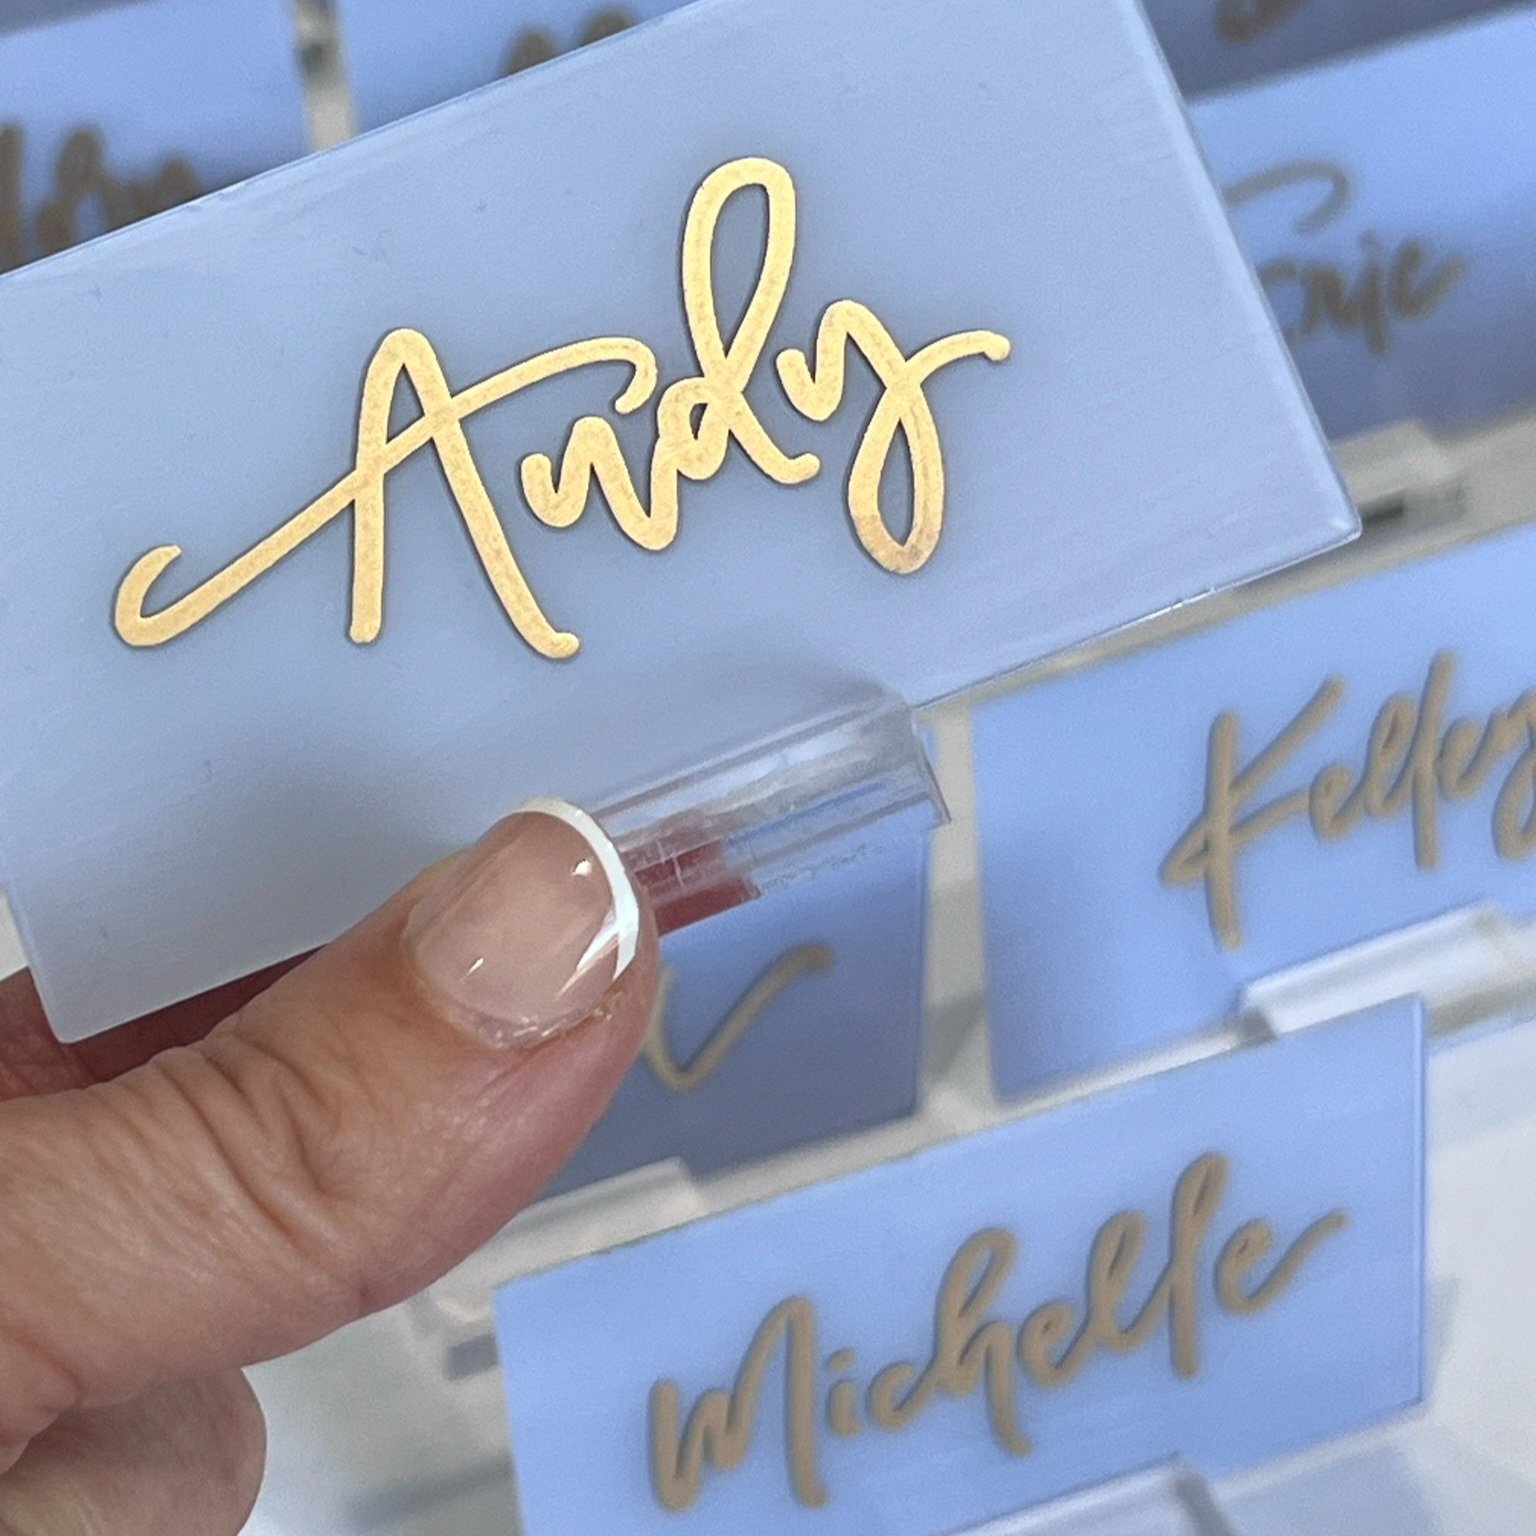 acrylic-place-card-calligraphy-dallas-party.jpg